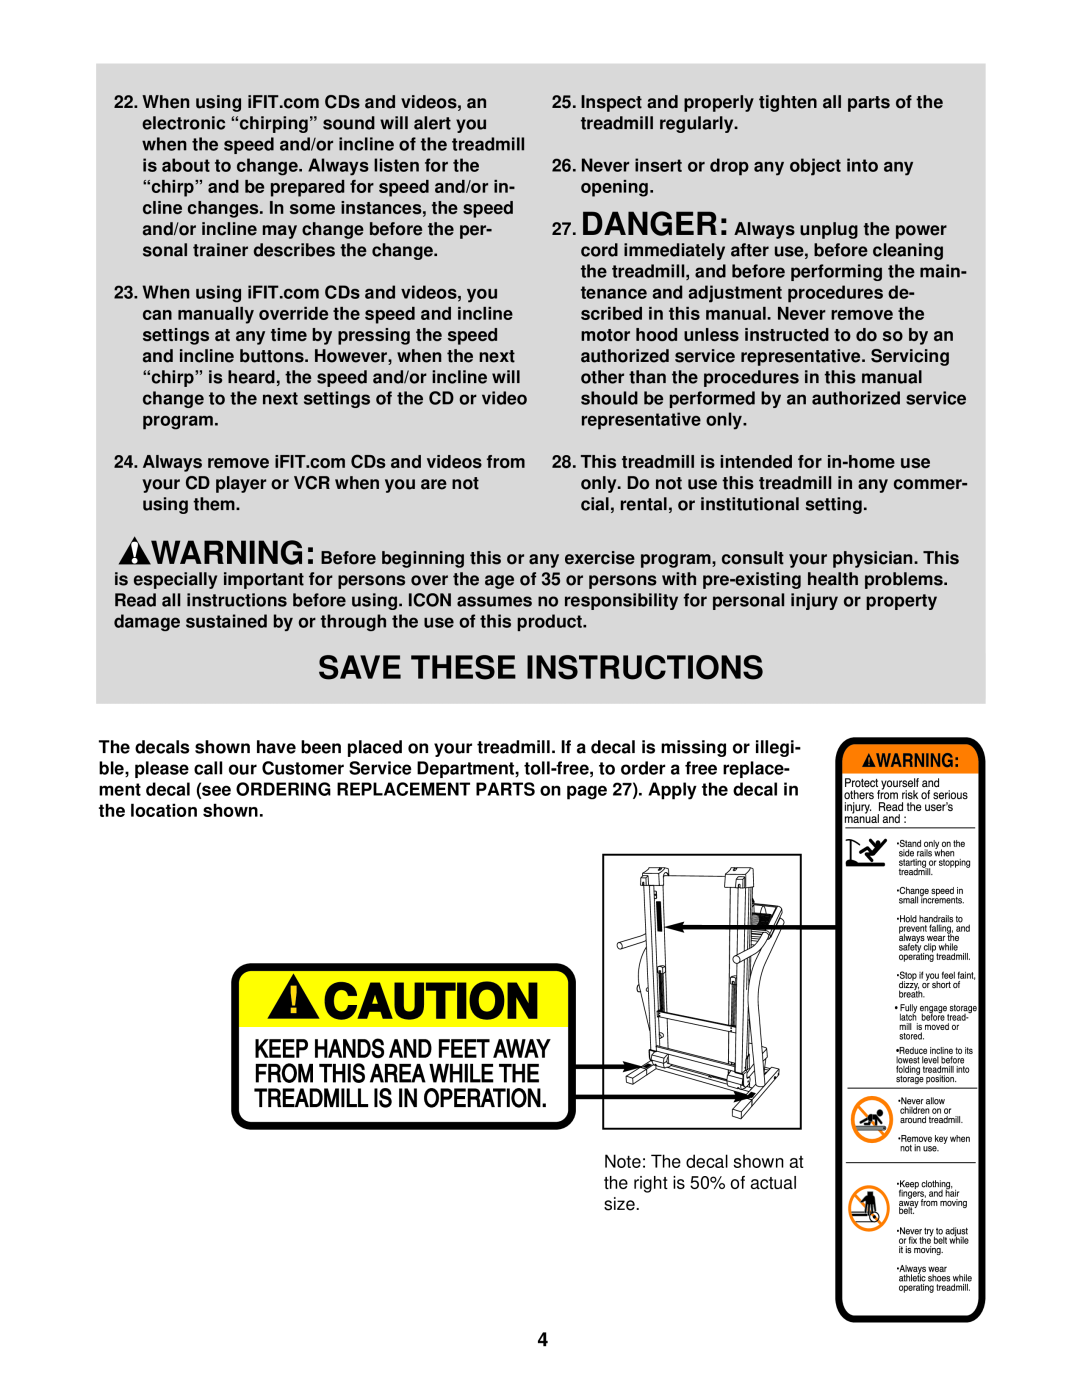 NordicTrack NTL99030 user manual Save These Instructions, using them, Never insert or drop any object into any opening 